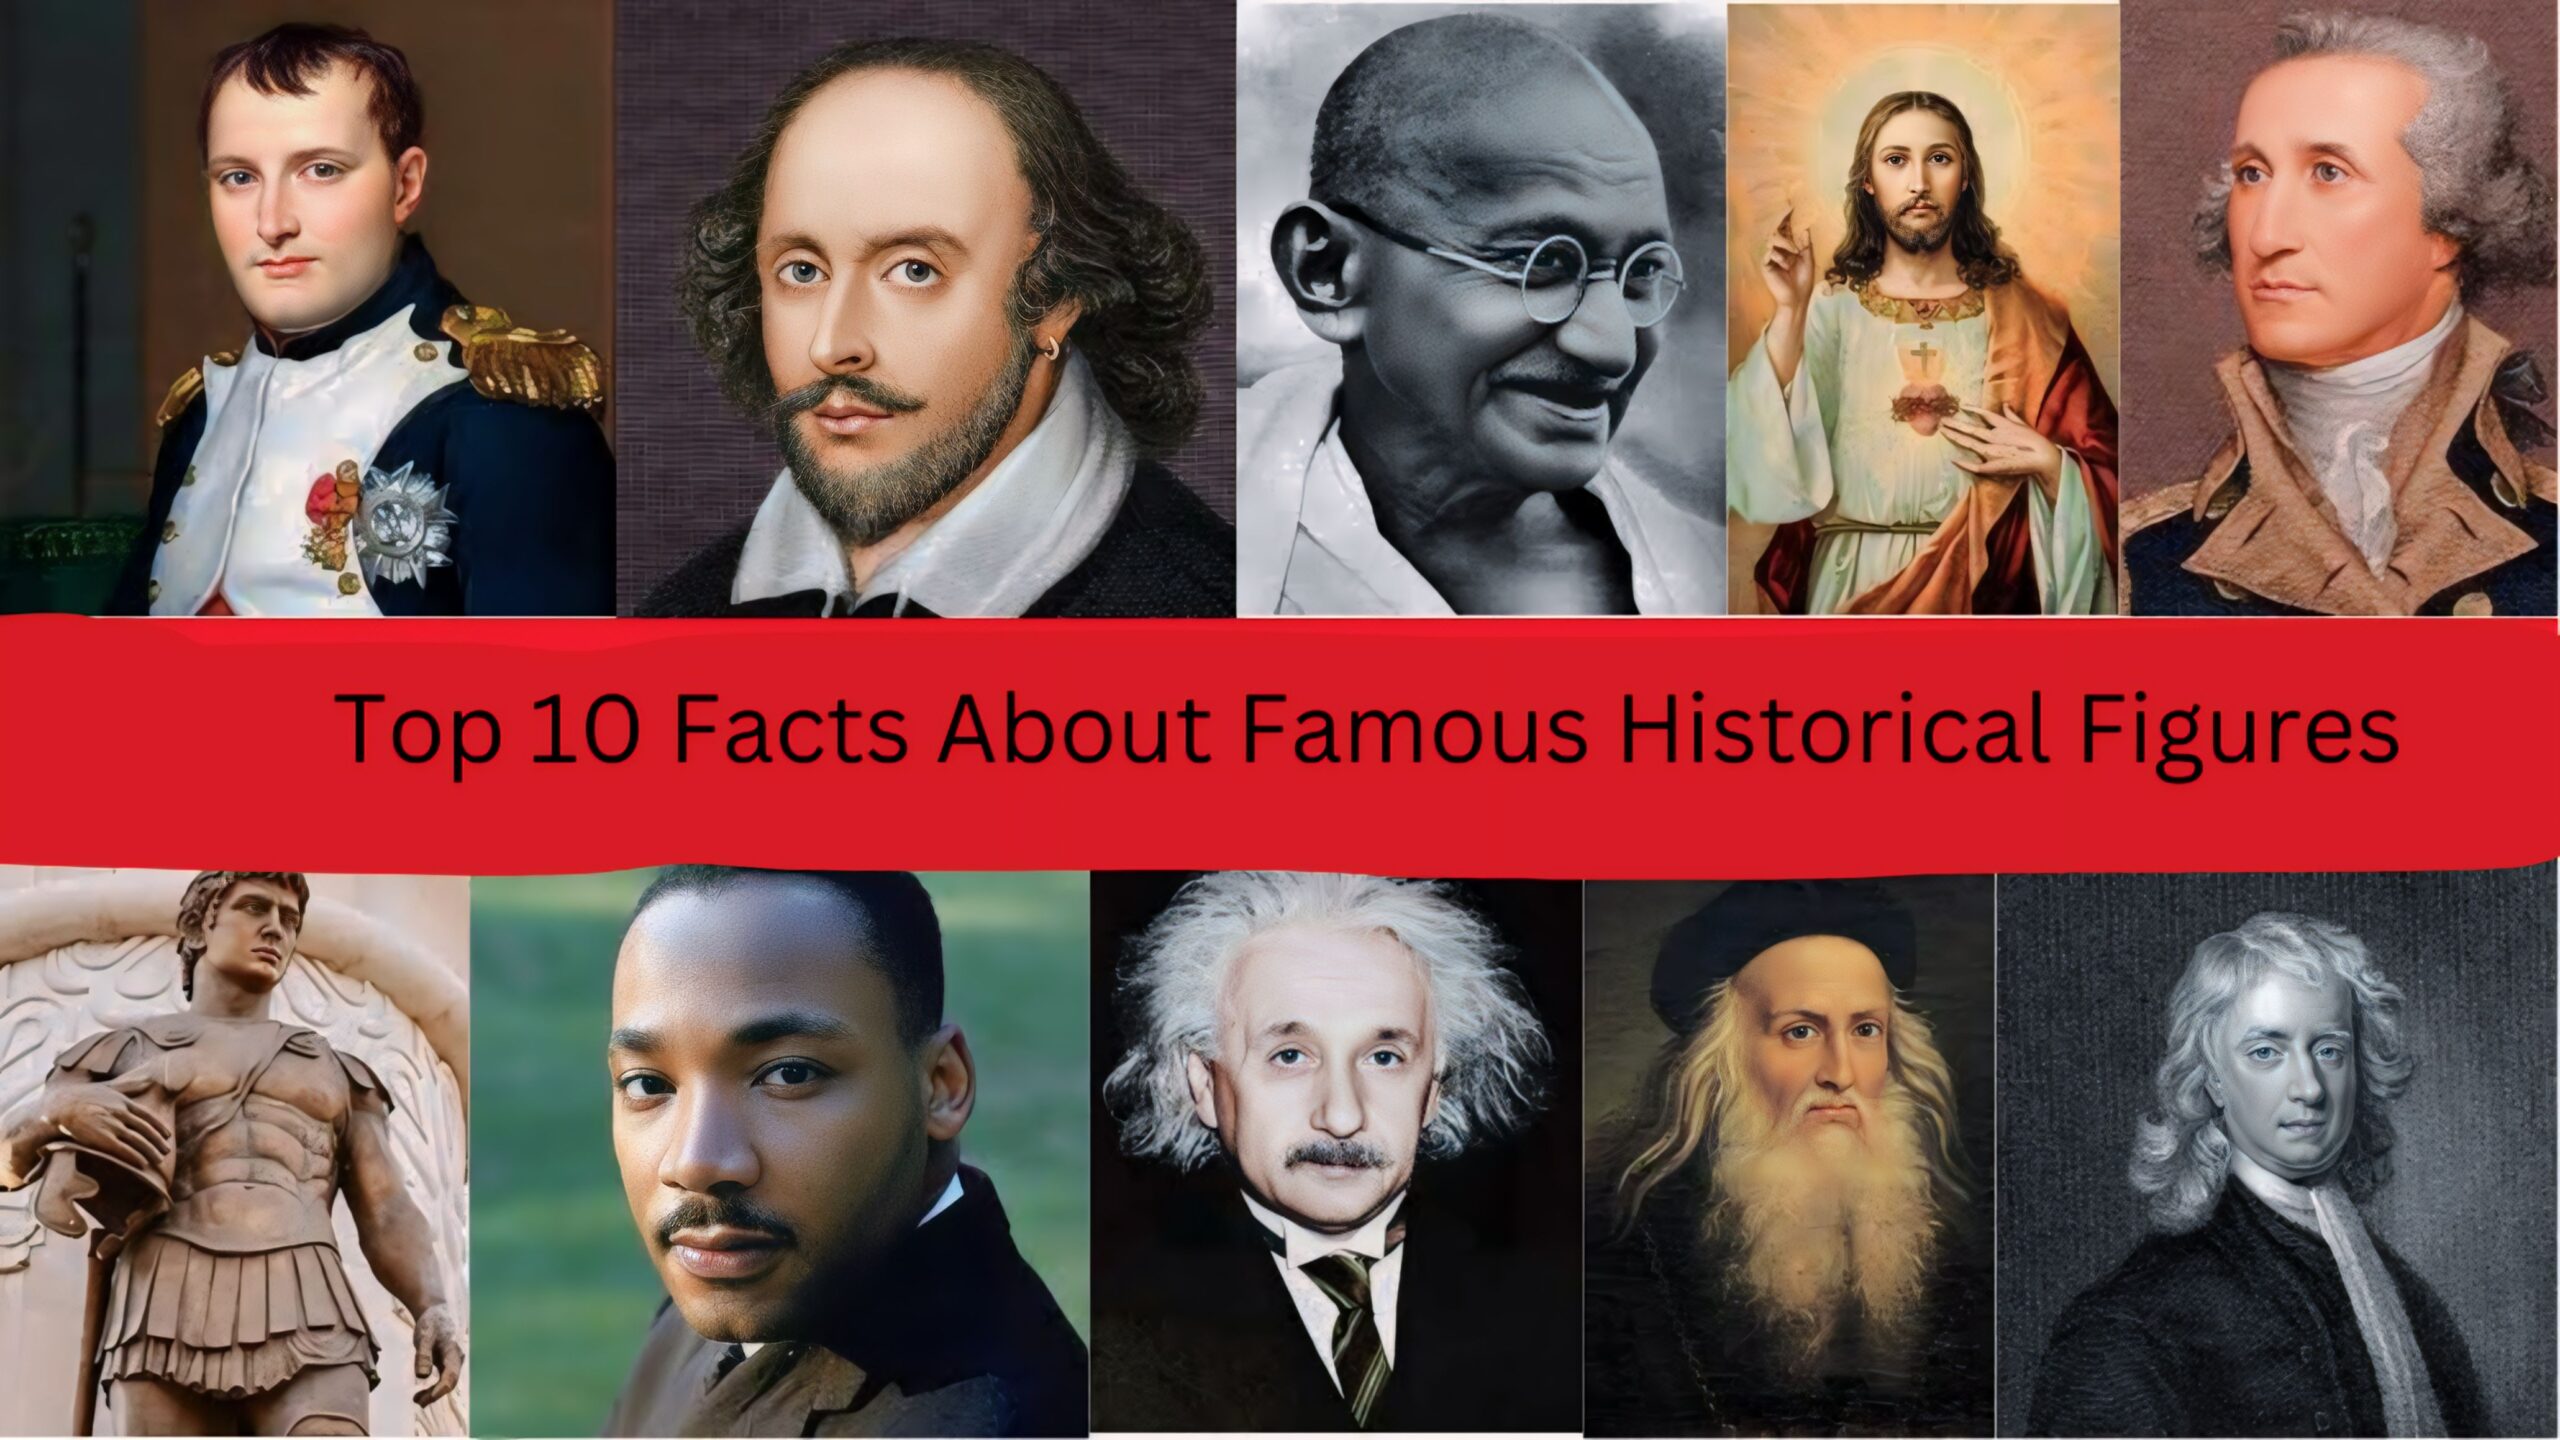 Top 10 Facts About Famous Historical Figures